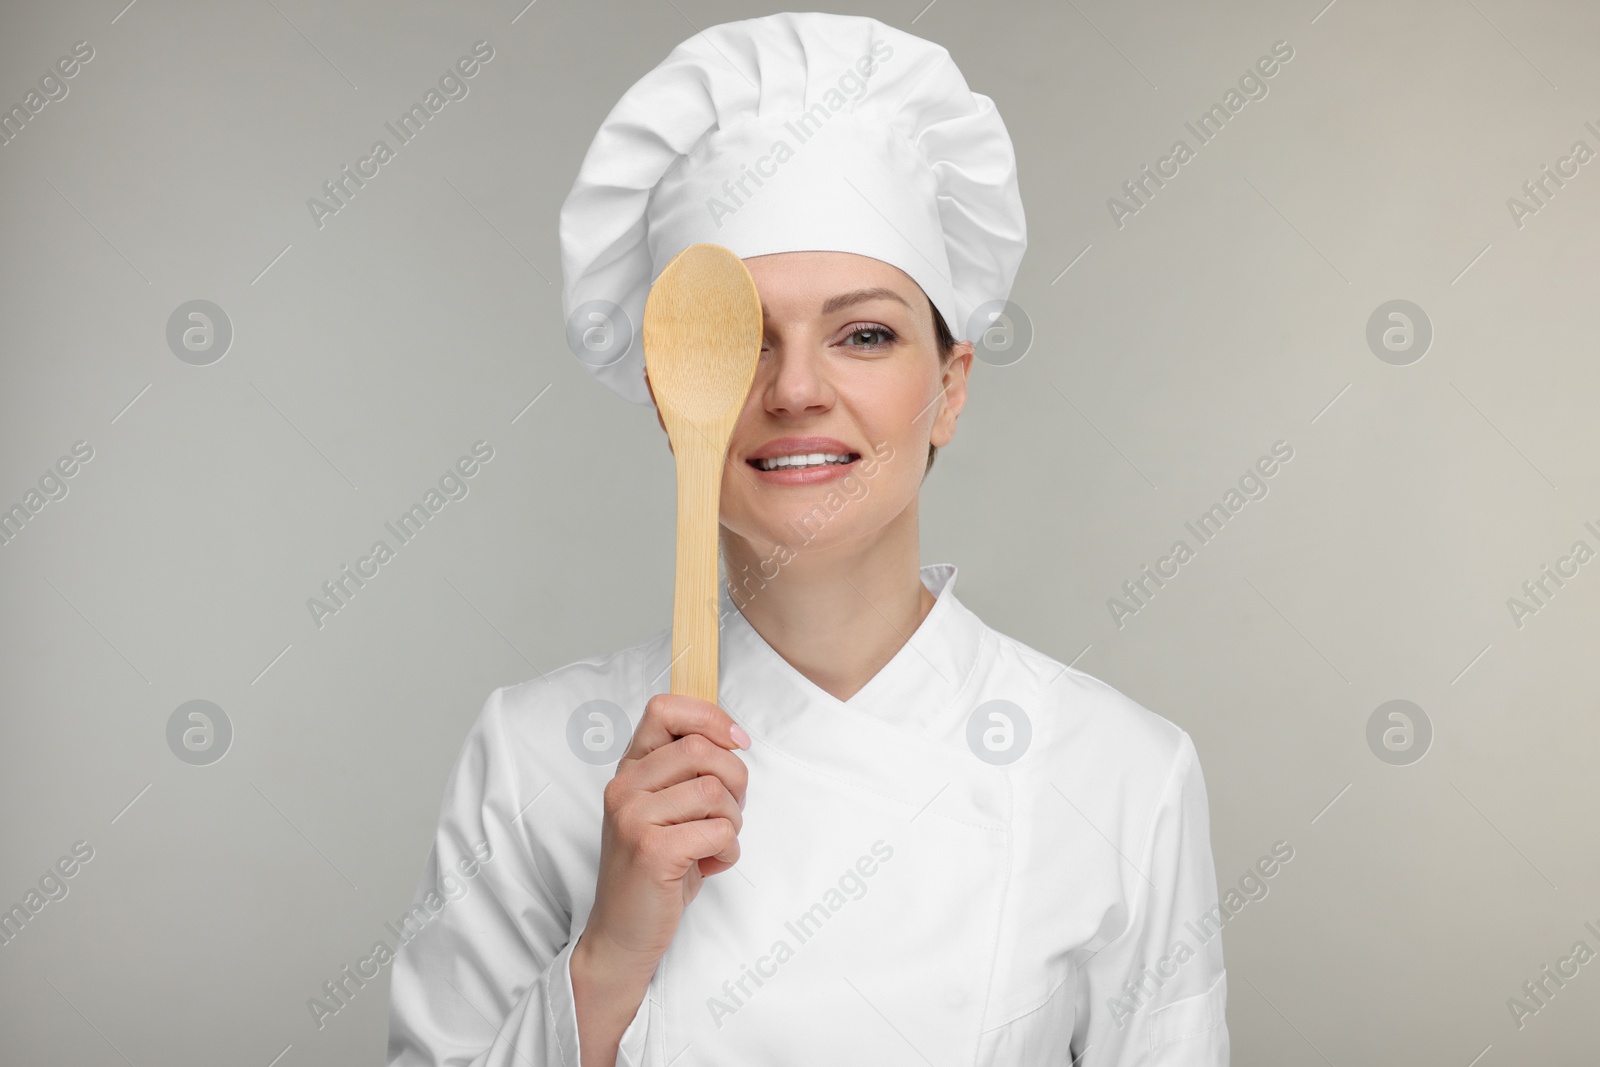 Photo of Happy woman chef in uniform holding wooden spoon on grey background